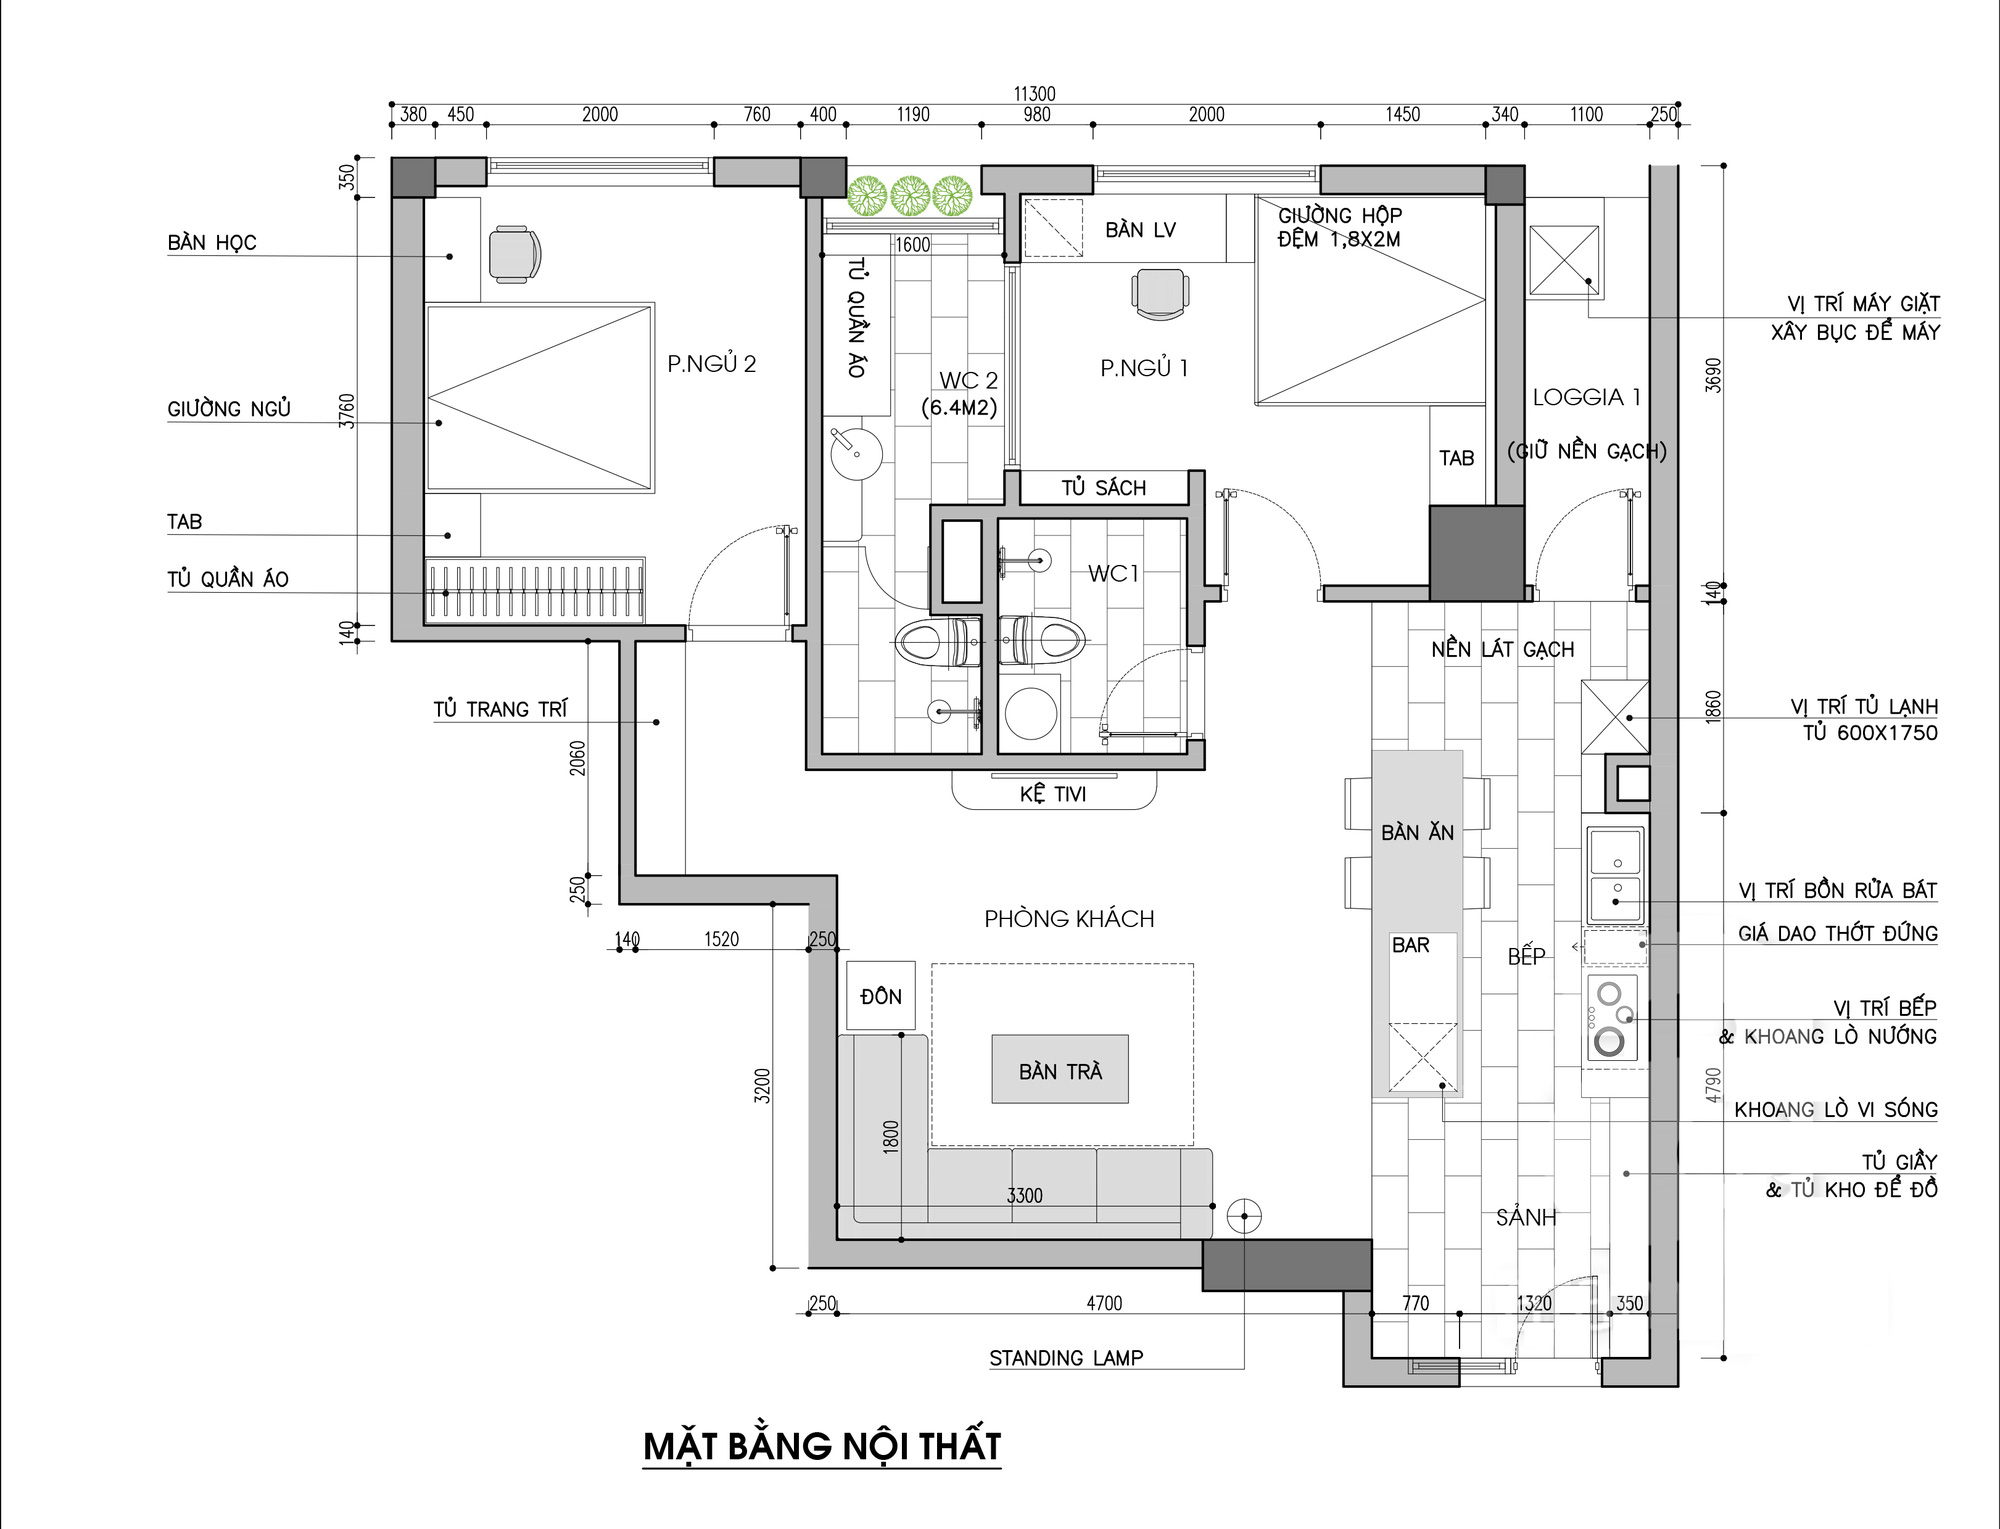 Consulting to renovate a 79m² apartment with a total cost of VND 140 million - Photo 2.